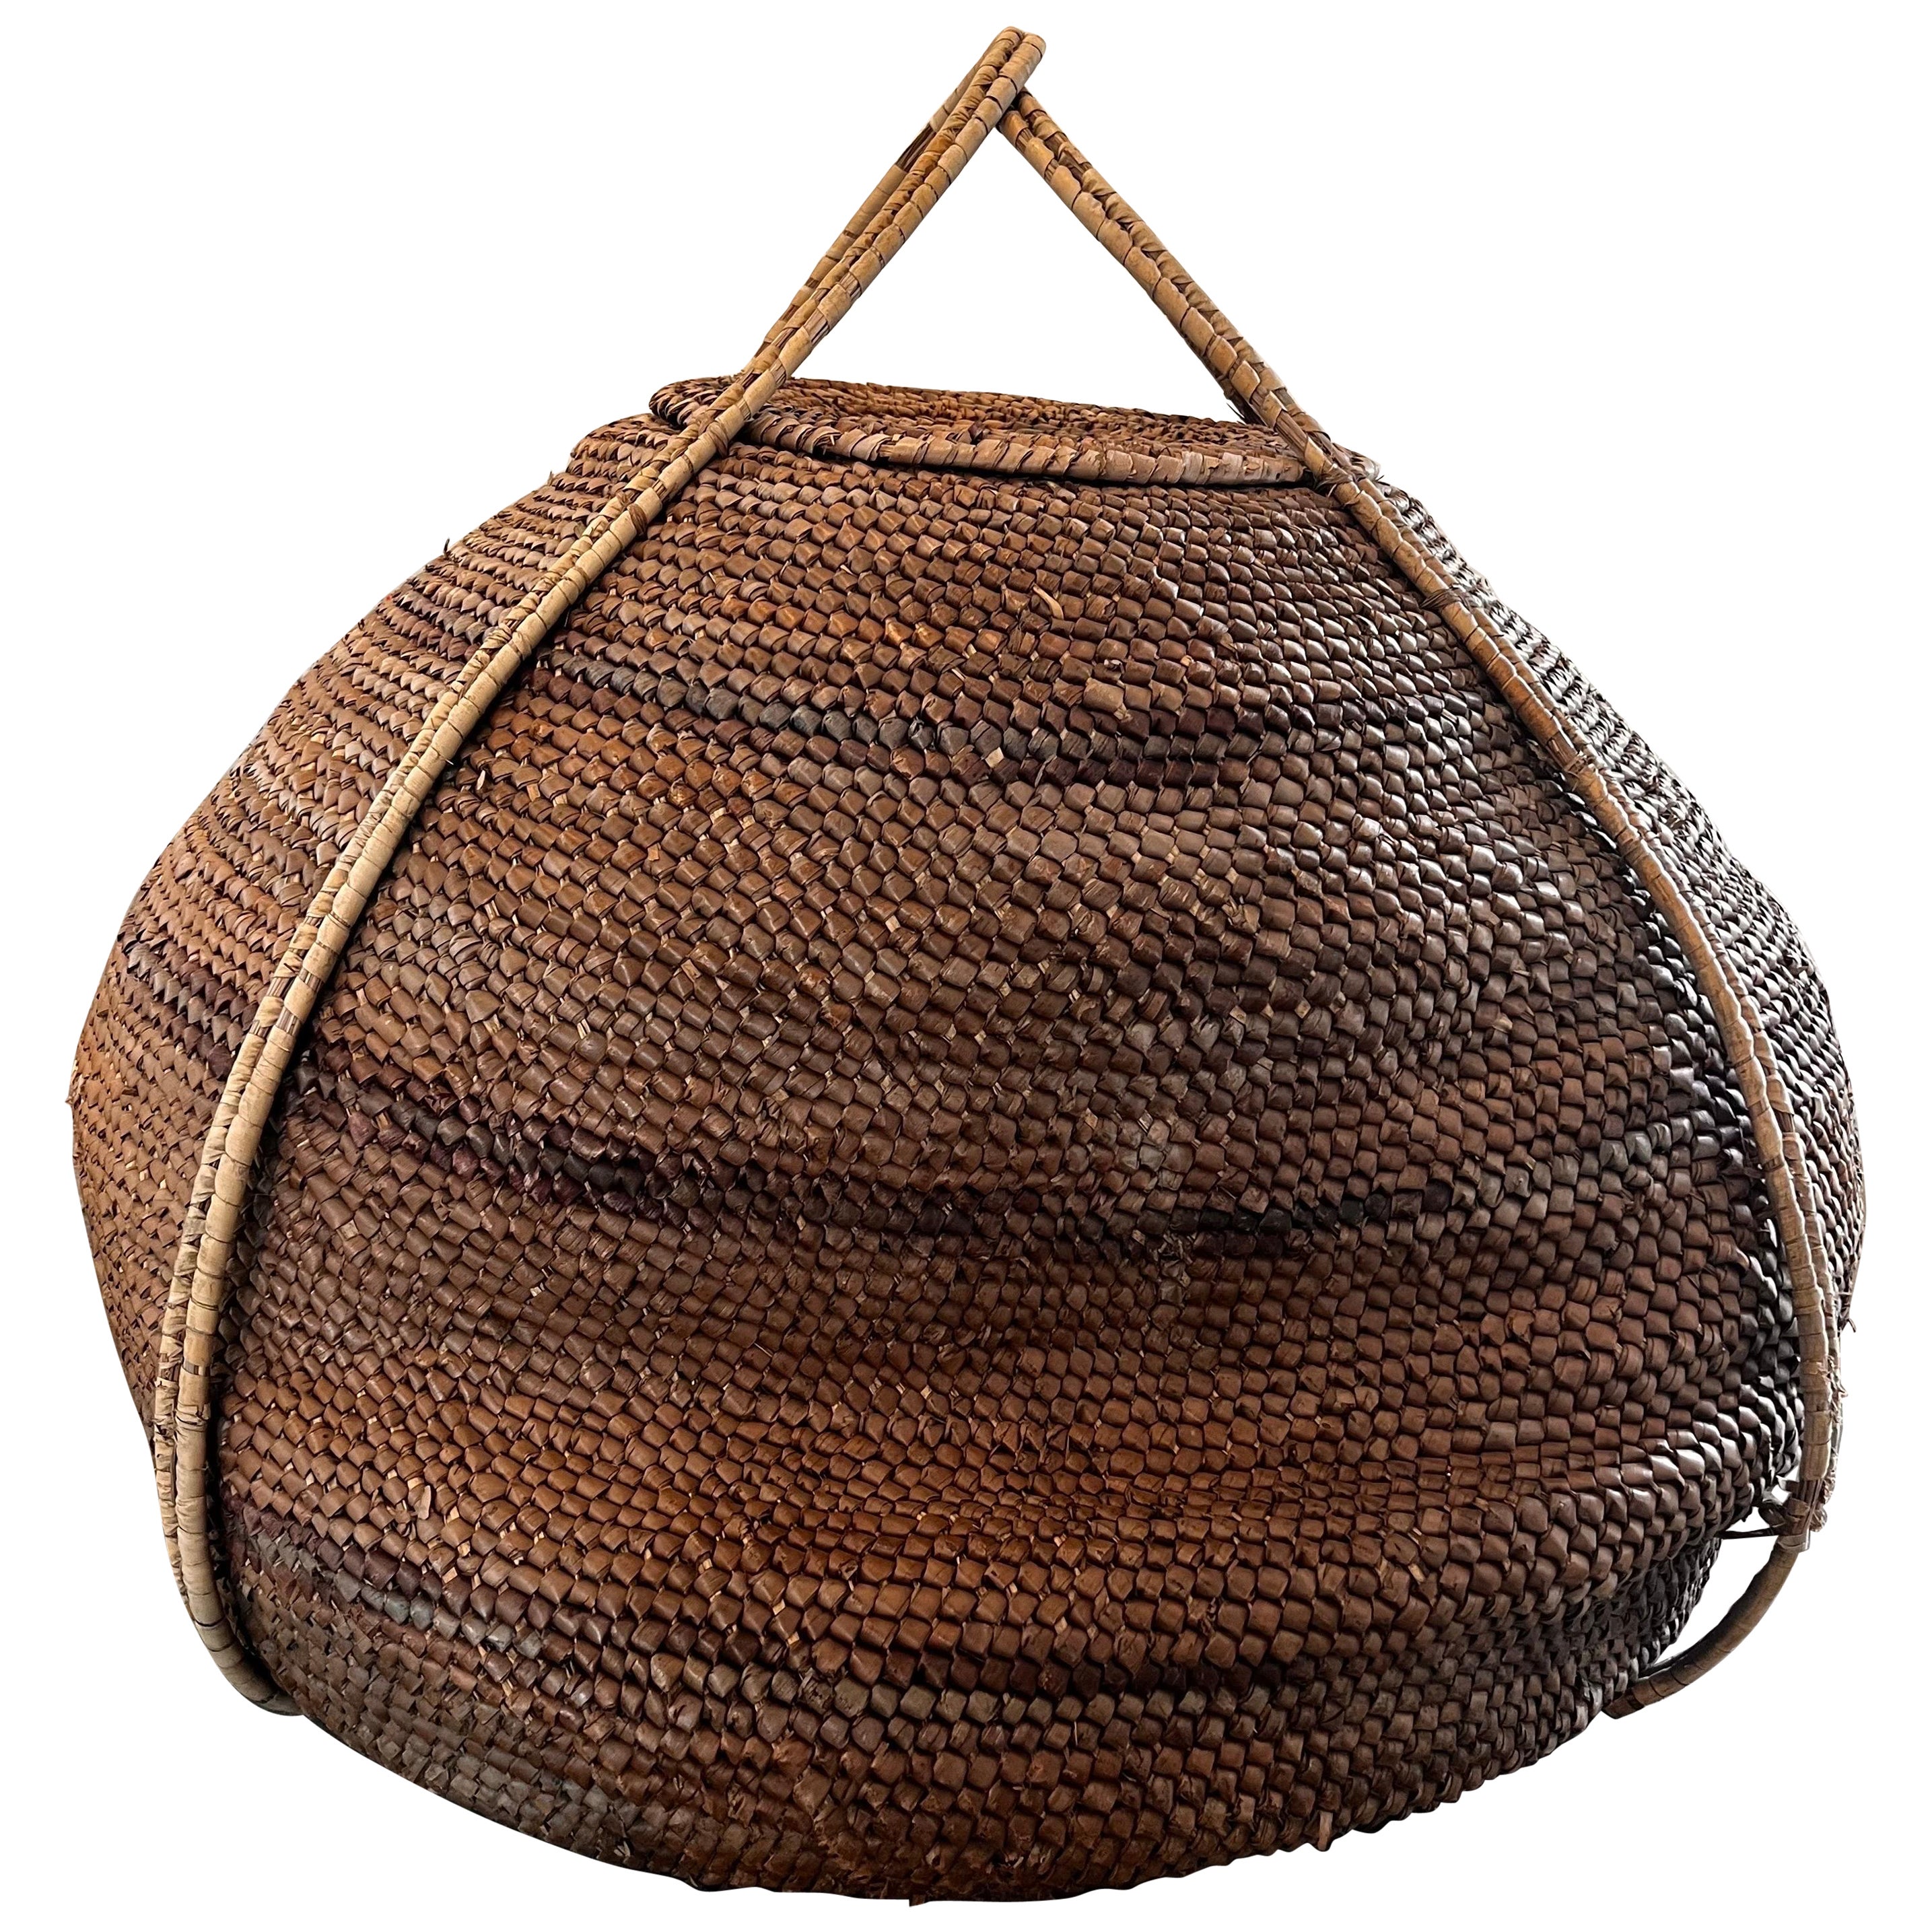 Mid-20th Century Massive Hand-Woven Lidded American Basket-Continuous Handles